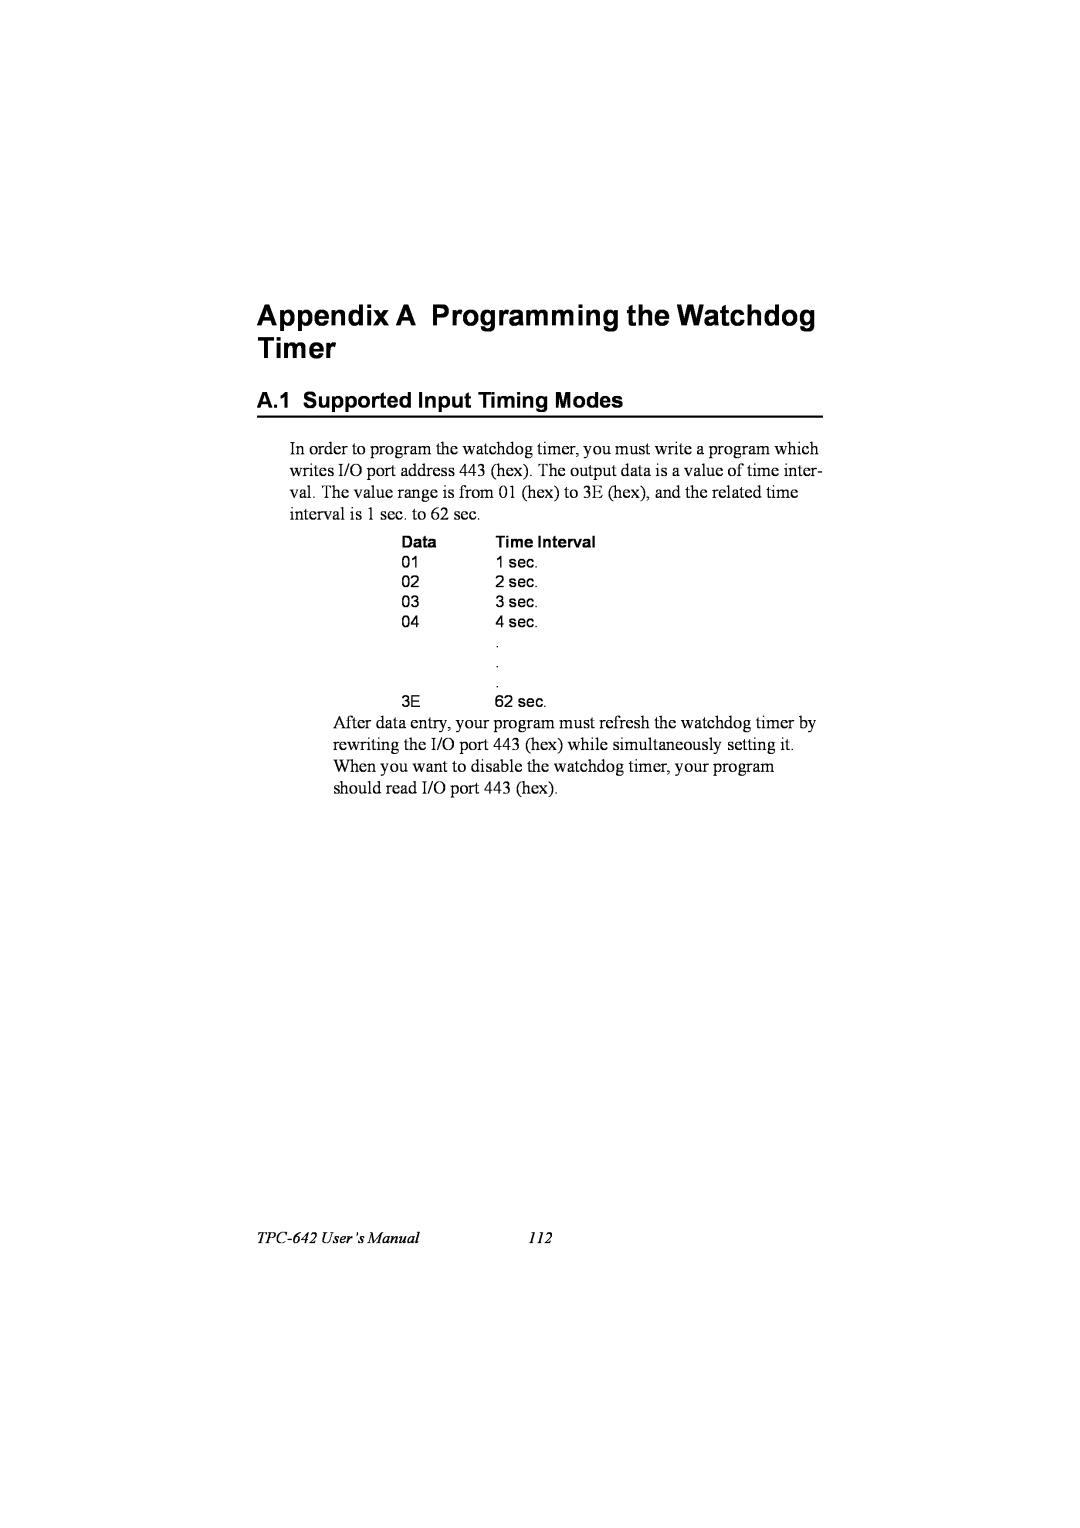 IBM PCM-9575, 100/10 user manual Appendix A Programming the Watchdog Timer, A.1 Supported Input Timing Modes 